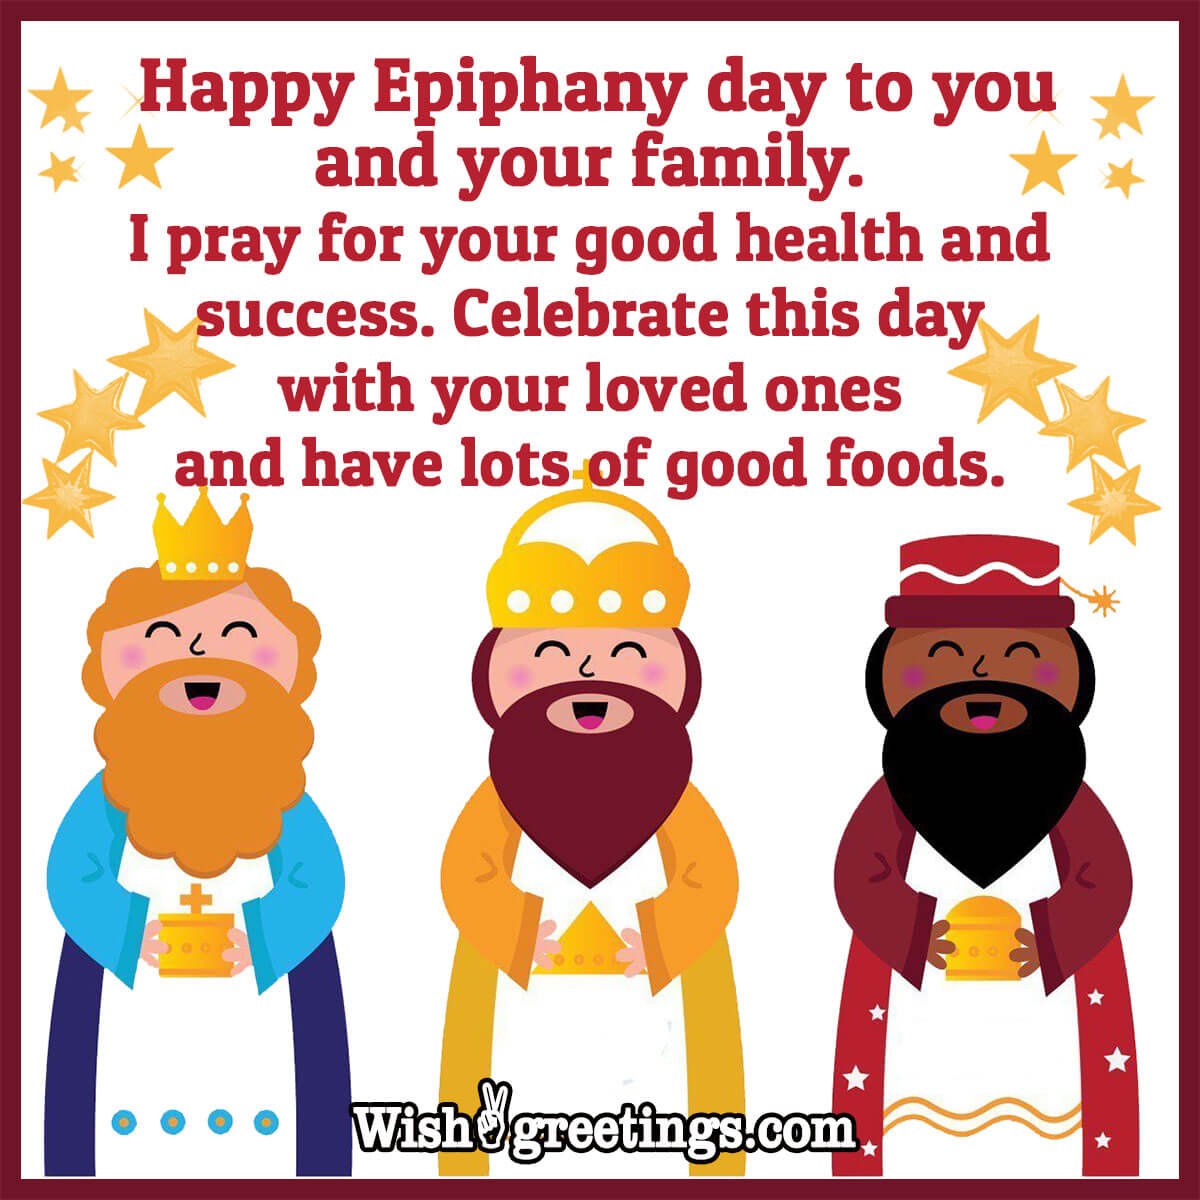 Happy Epiphany Day To You And Your Family.